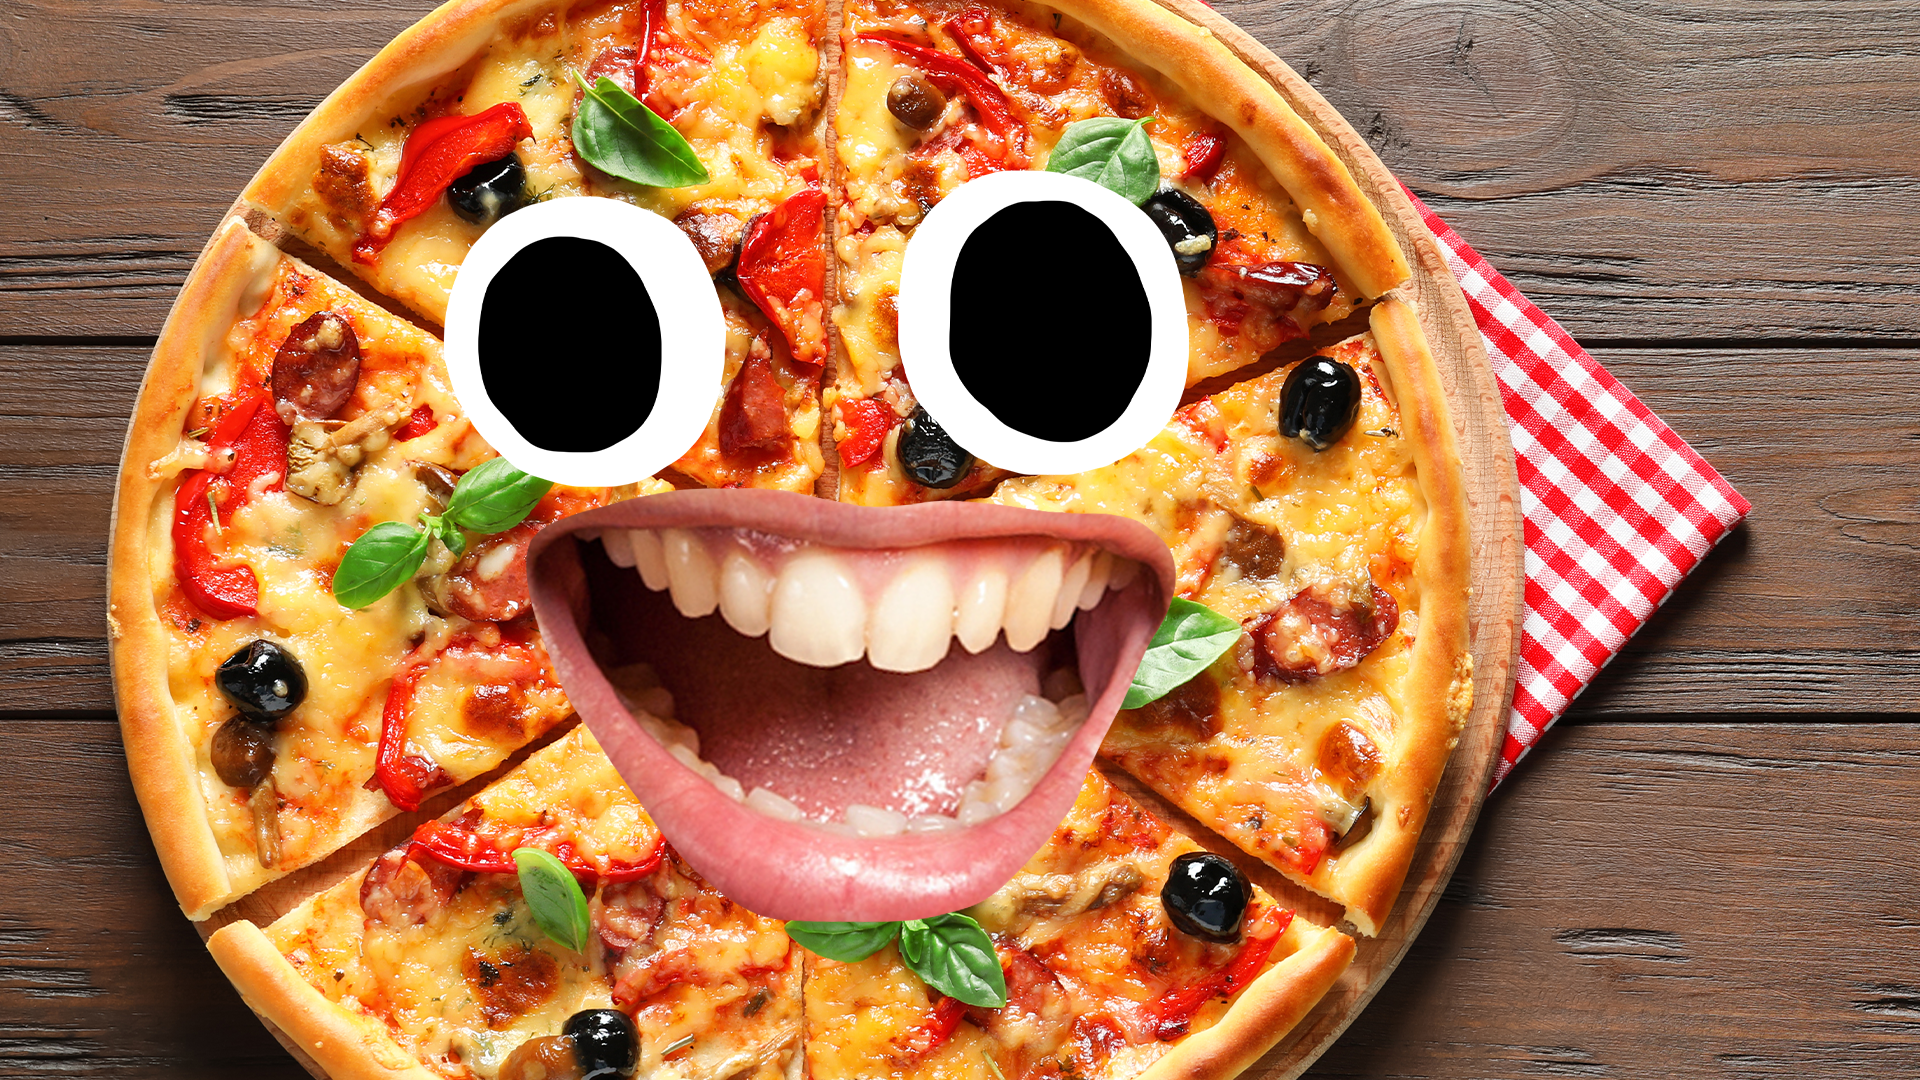 Grinning pizza